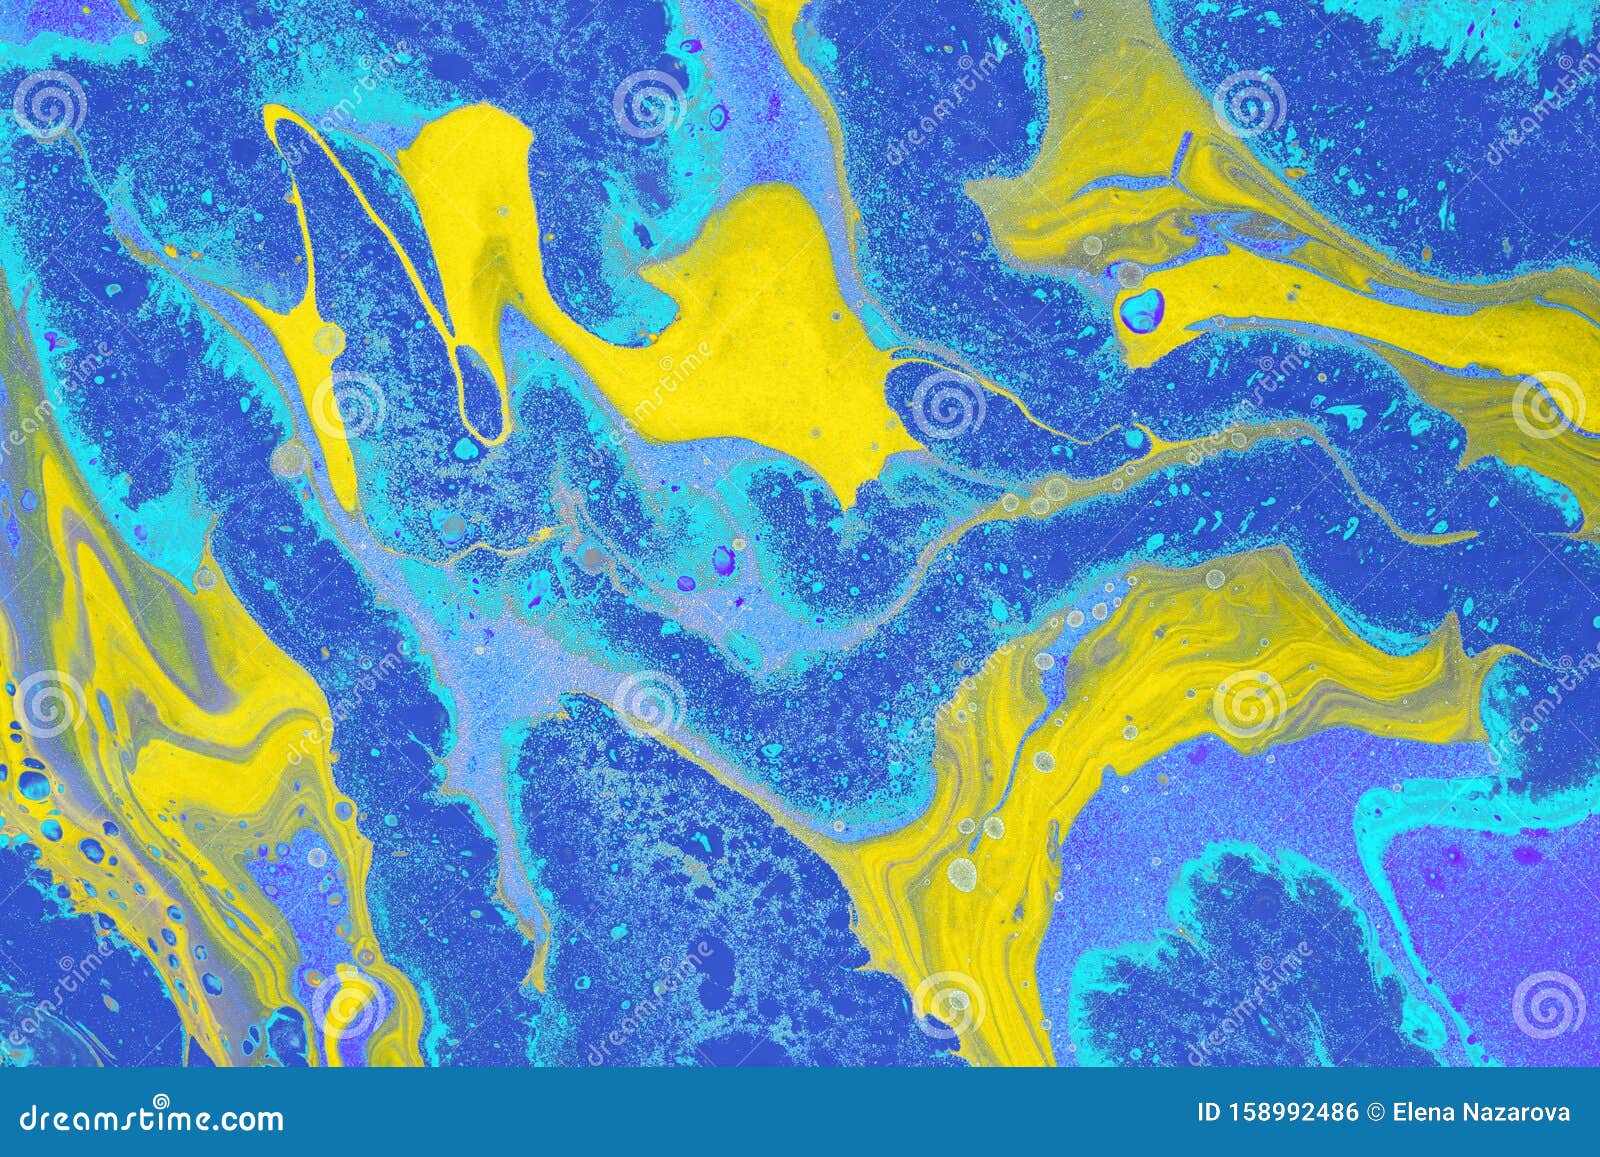 Acrylic Paint Abstract Marble Texture Fluid Waves And Curls Of Free Flowing  Blue Backgrounds